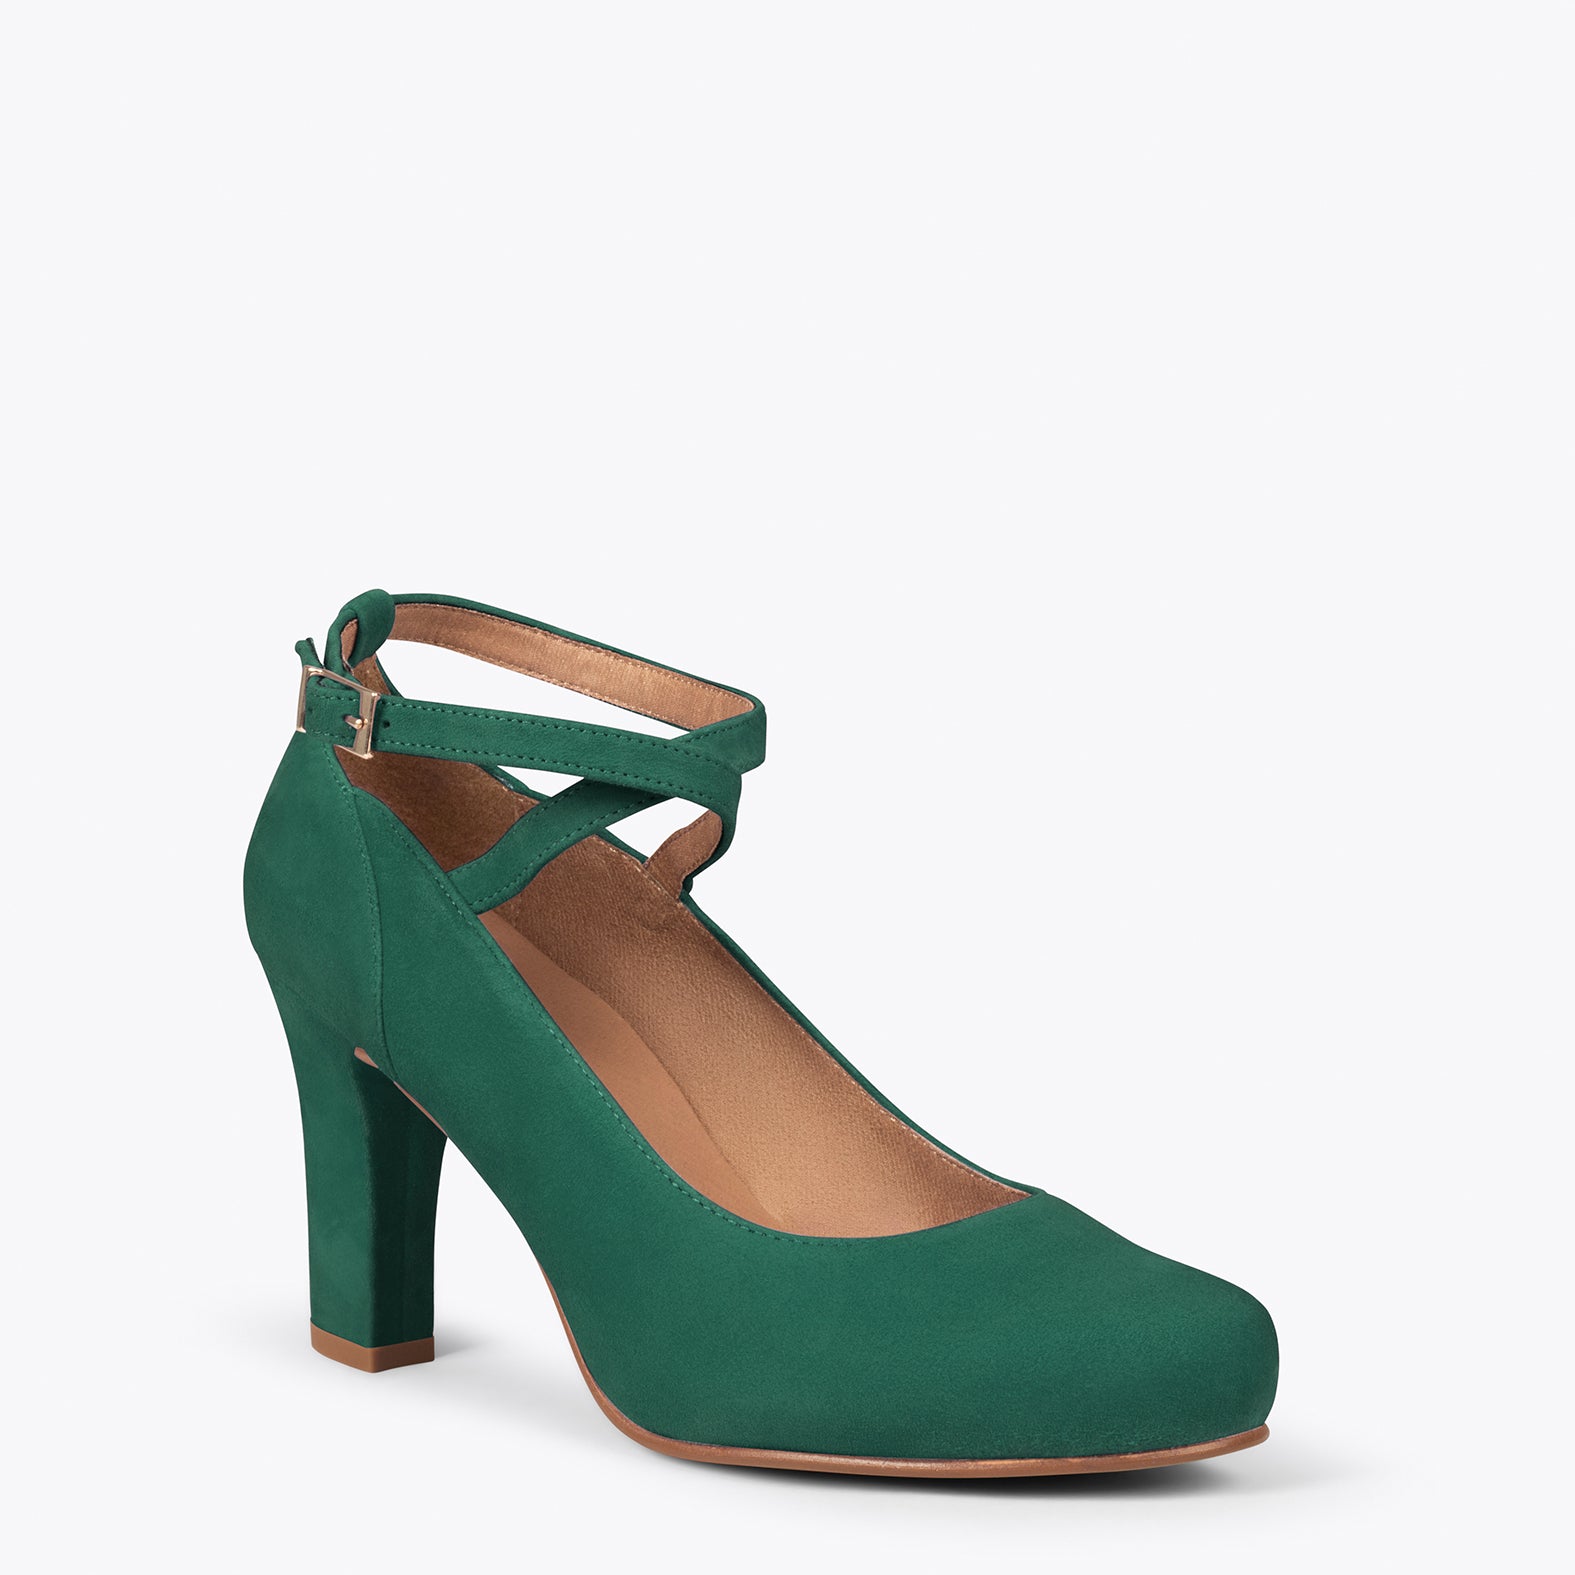 STRAPS – GREEN high heels with crossed straps